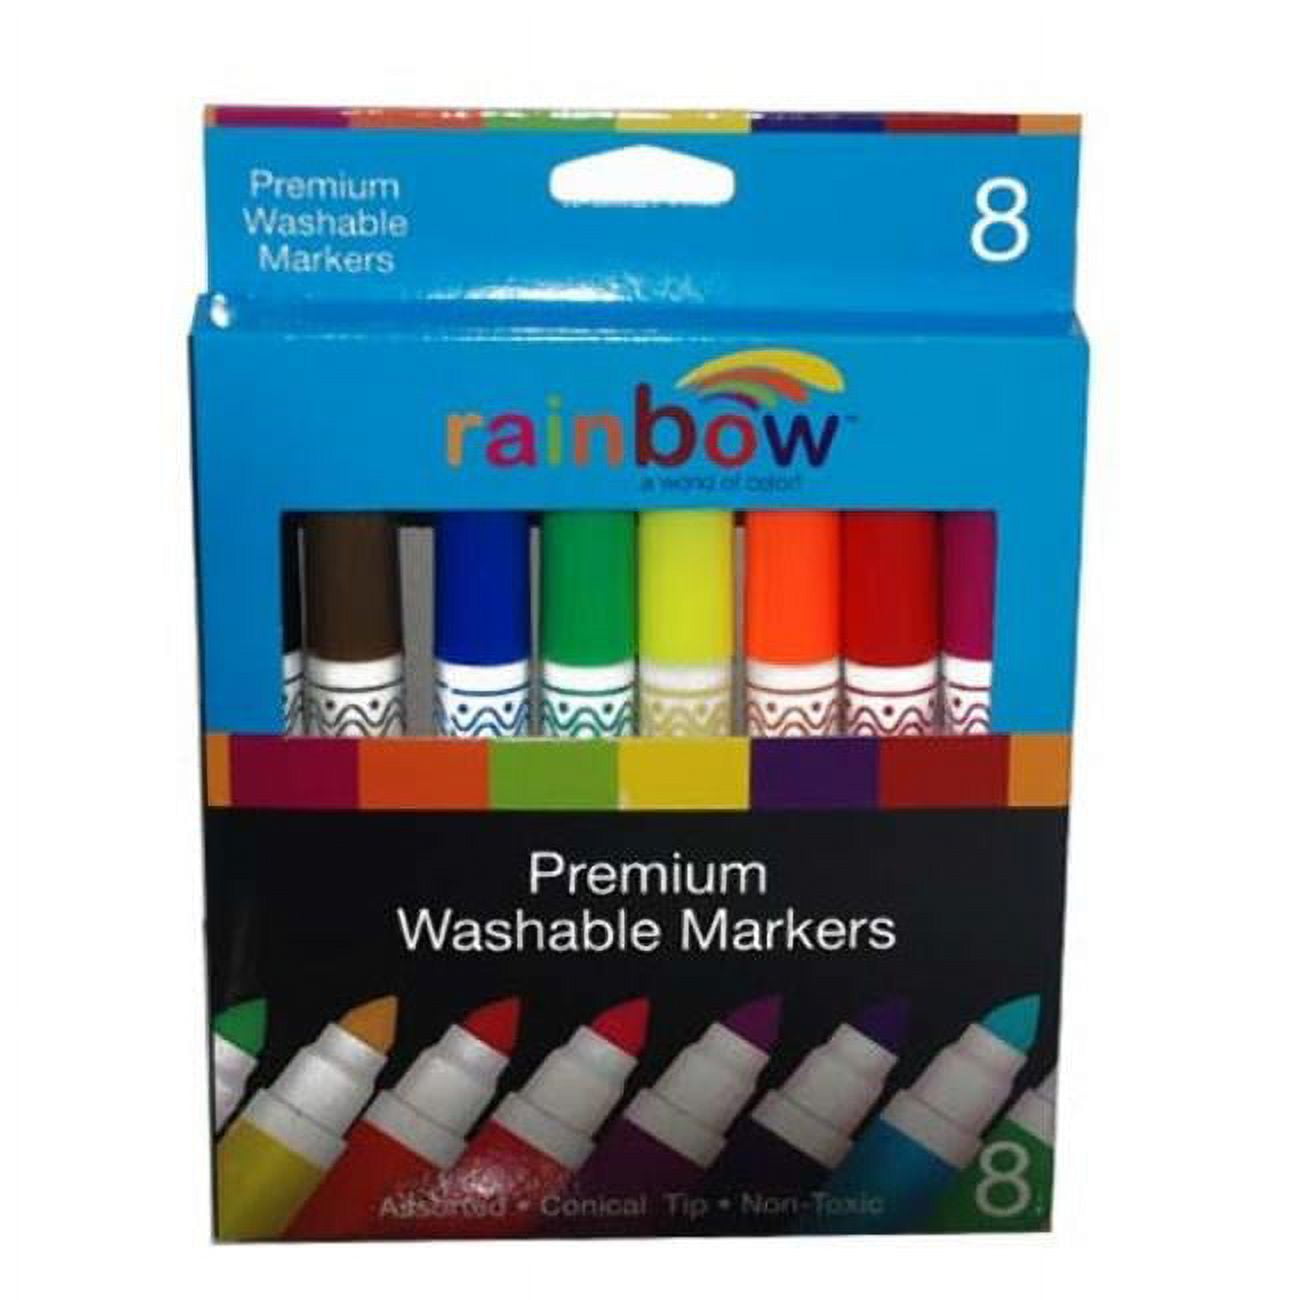 2330021 Premium Washable Markers - 8 Count - Case Of 48